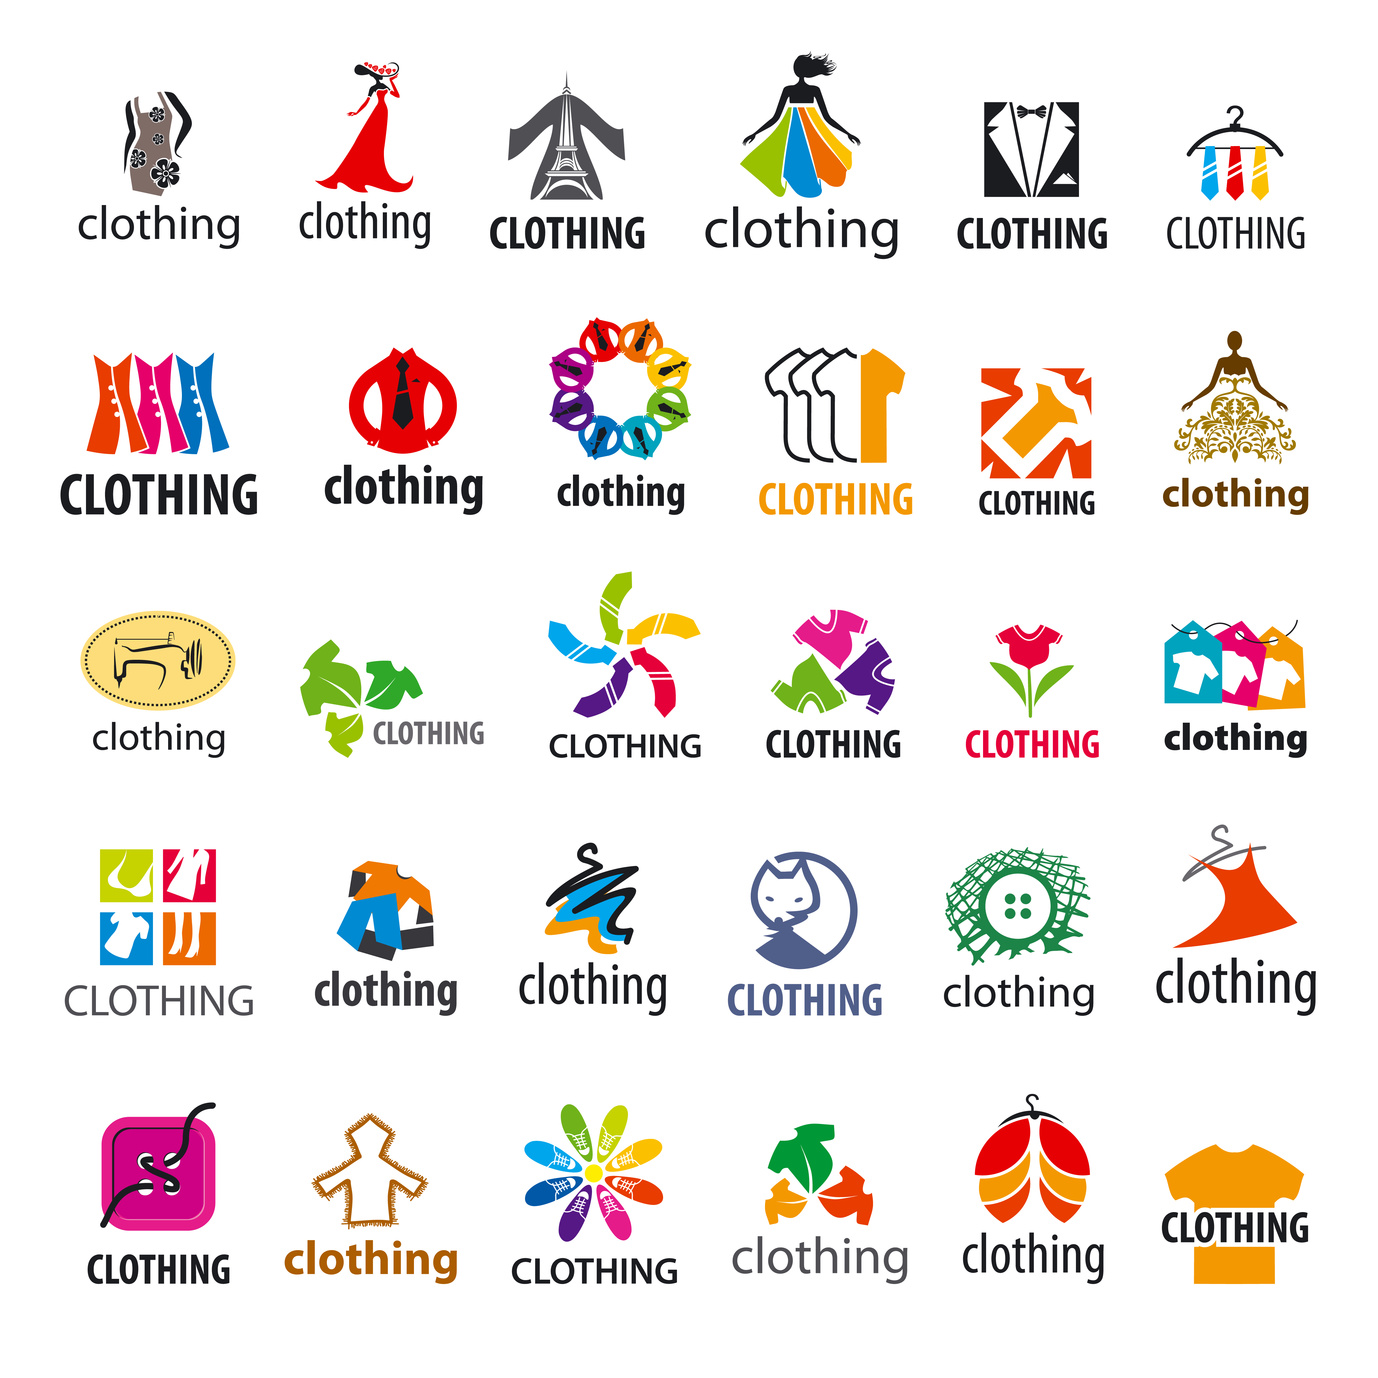 Retail Store Logos And Names